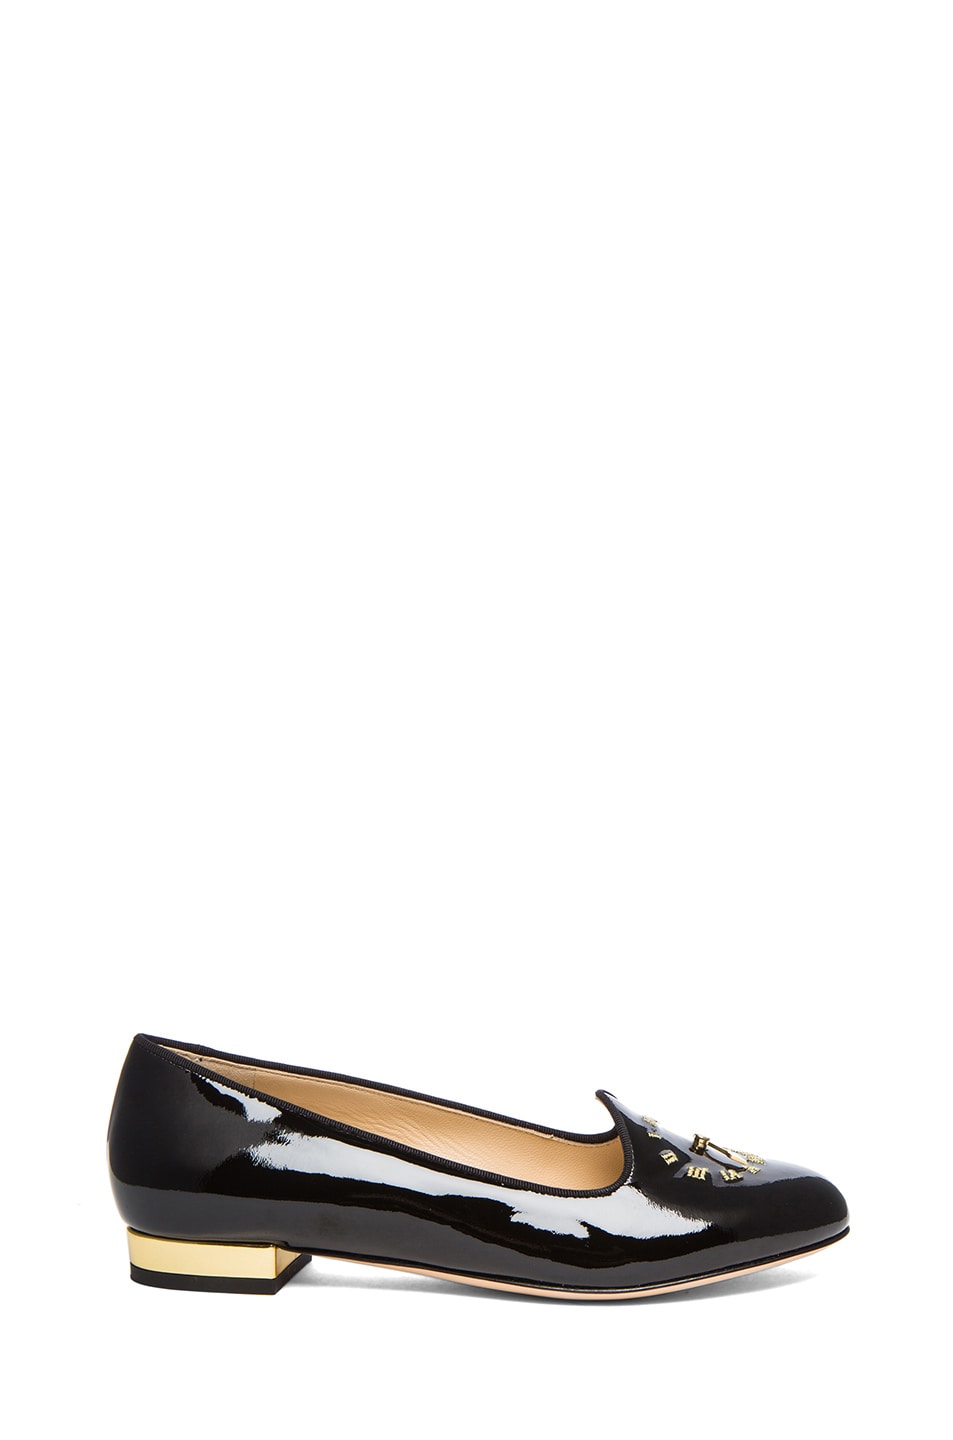 Image 1 of Charlotte Olympia Fashionably Late Patent Leather Flats in Black